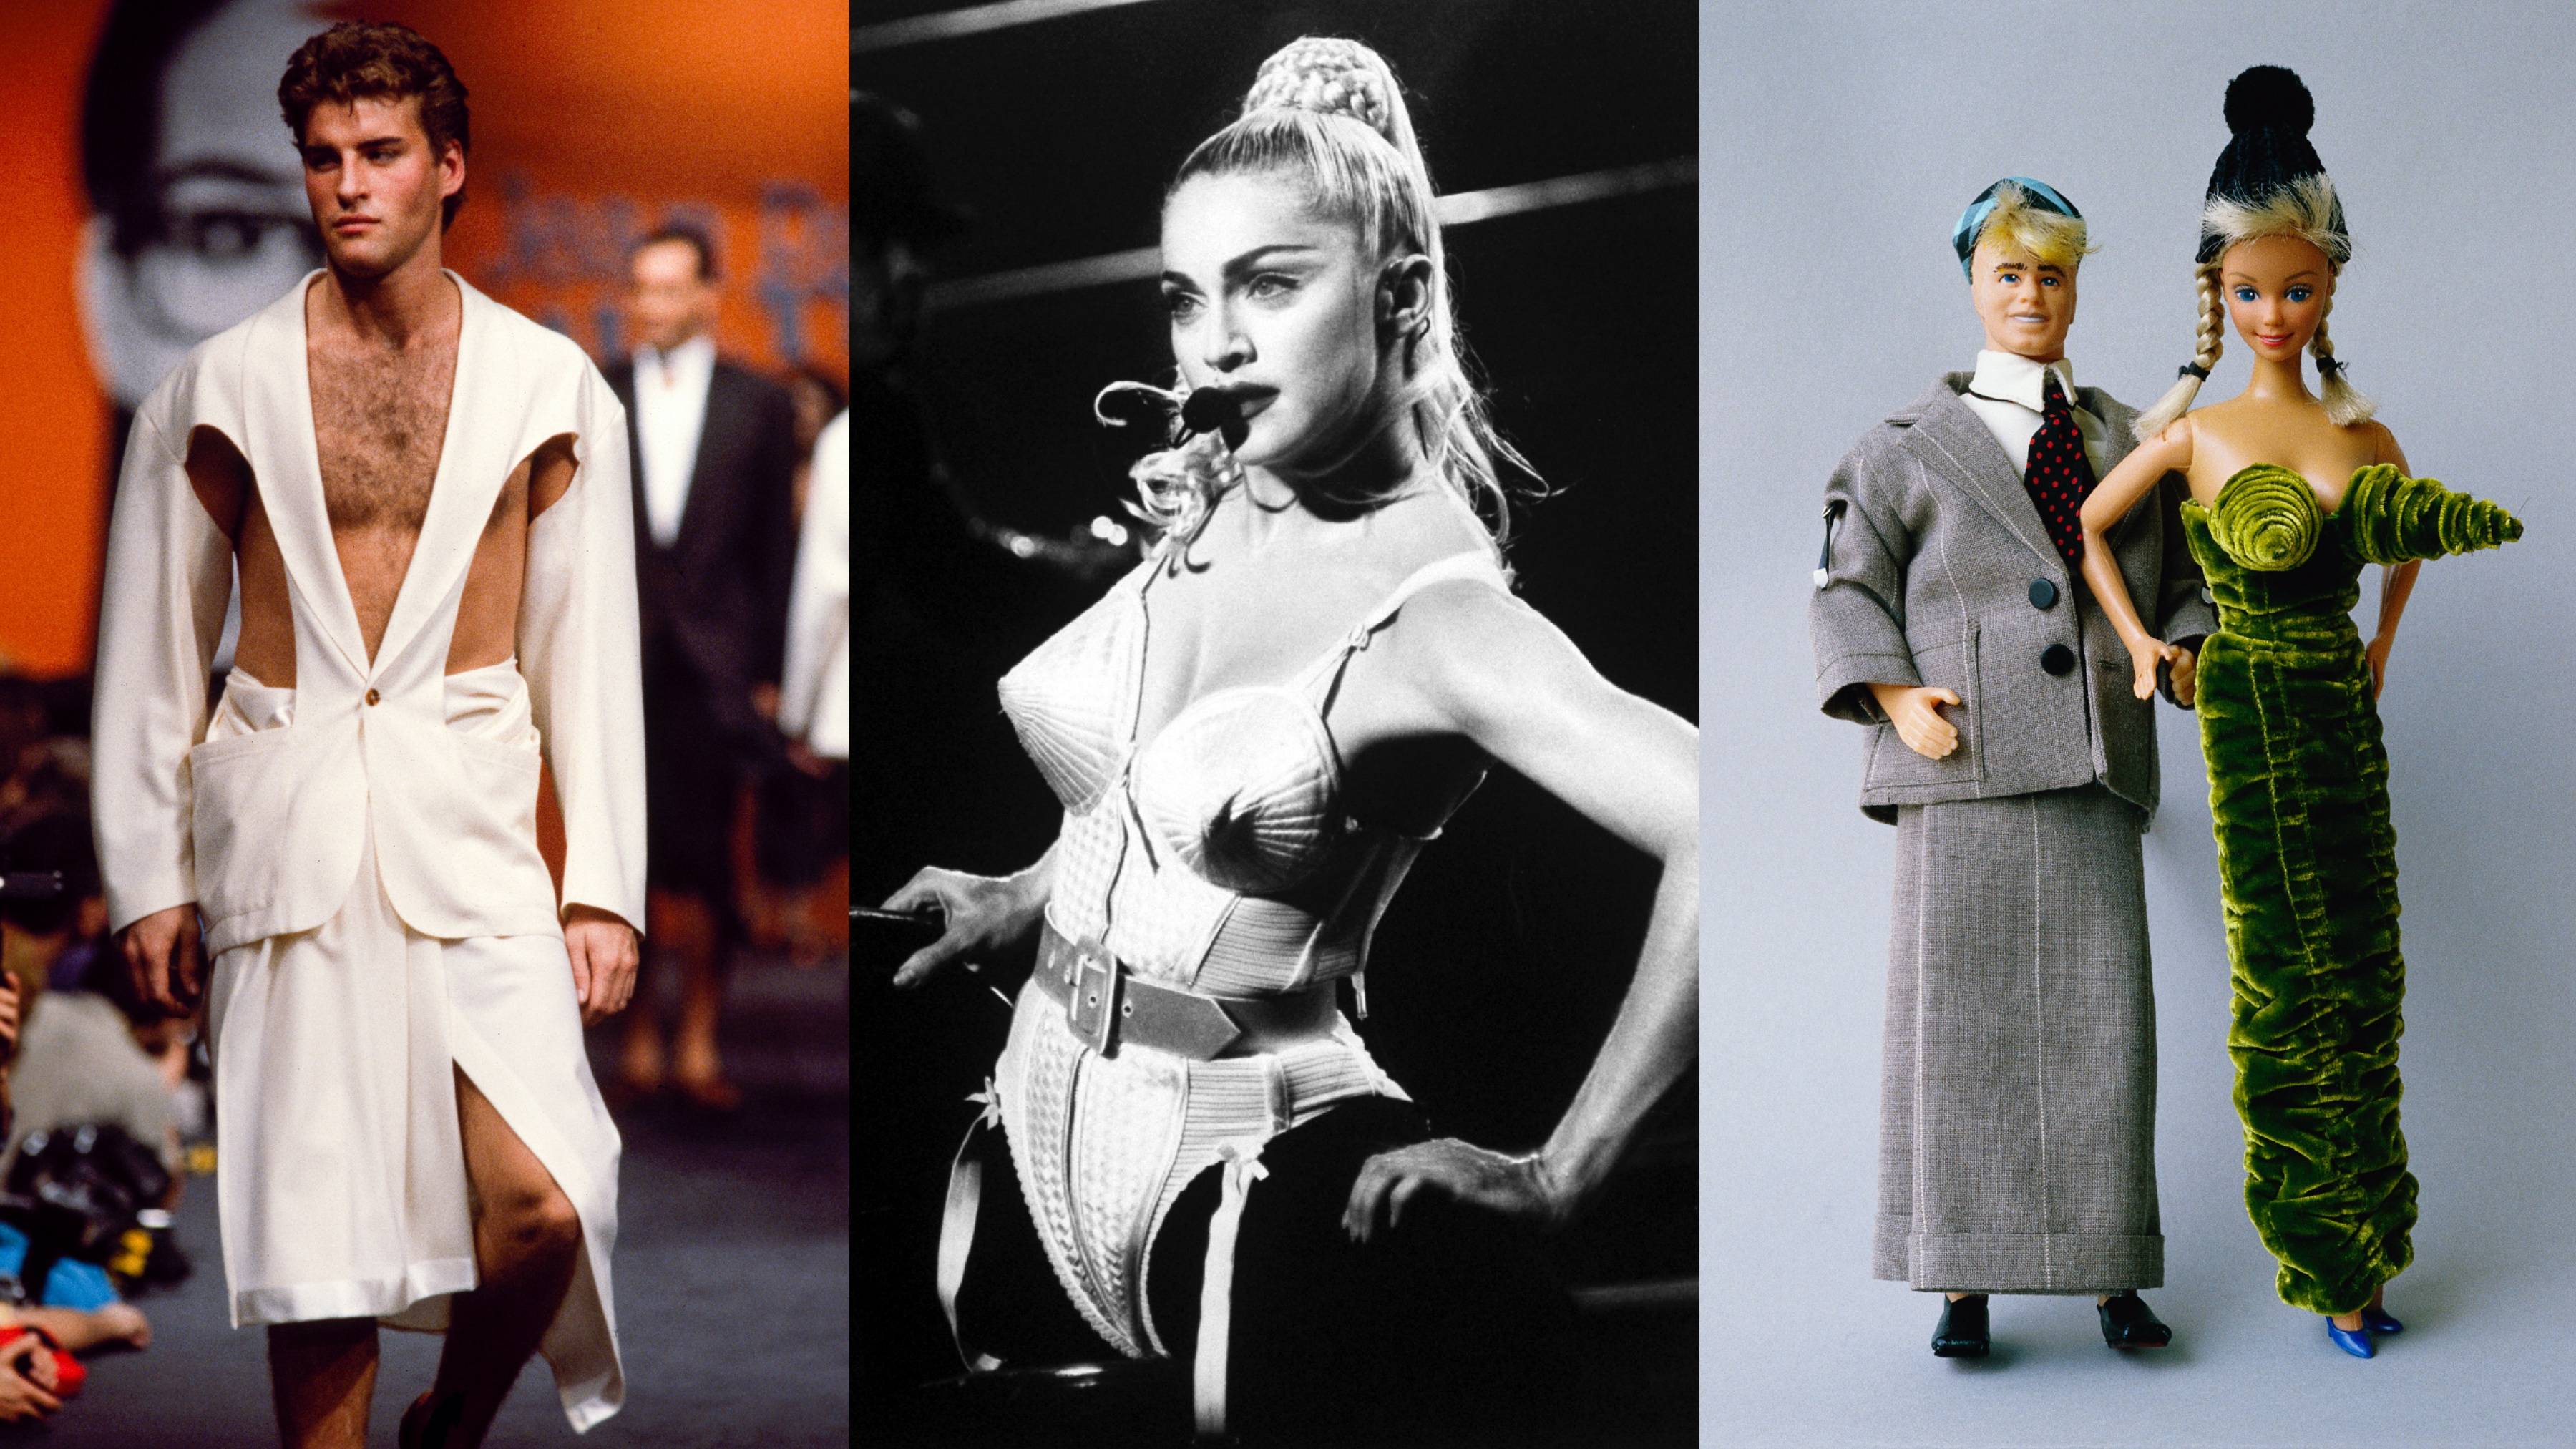 From Man Skirts to Cone Bras: A Look at Jean-Paul Gaultier's Haute